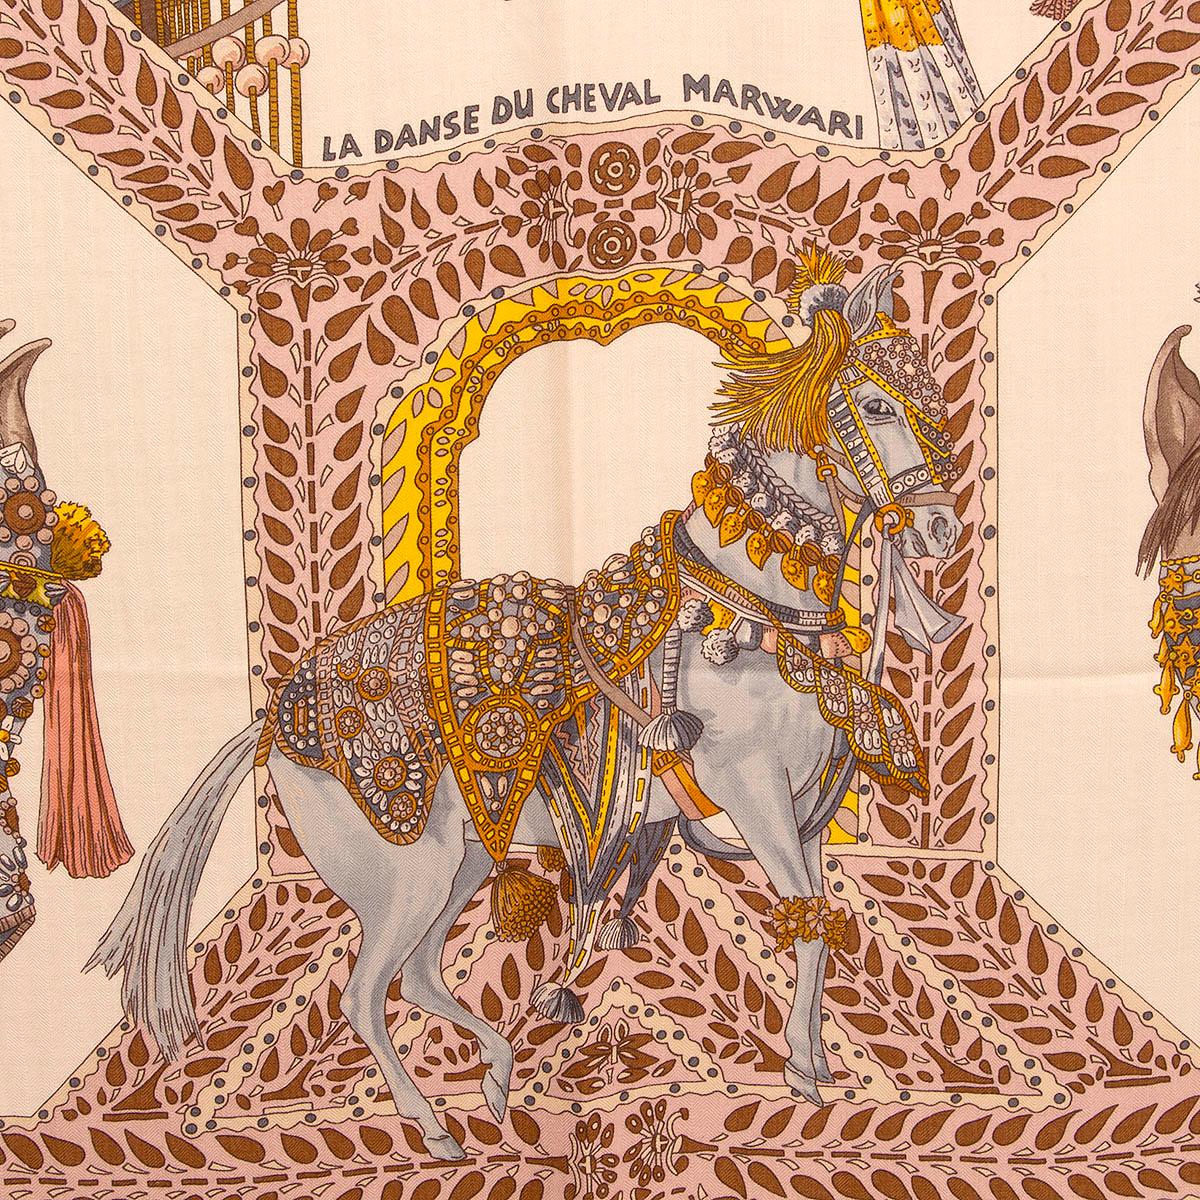 100% authentic Hermès 'La Danse du Cheval Marwari 140' shawl by Annie Faivre in white cashmere (65%) and silk (35%) with bright yellow border and details in pink, blue, brown and taupe. Has been worn and is in excellent